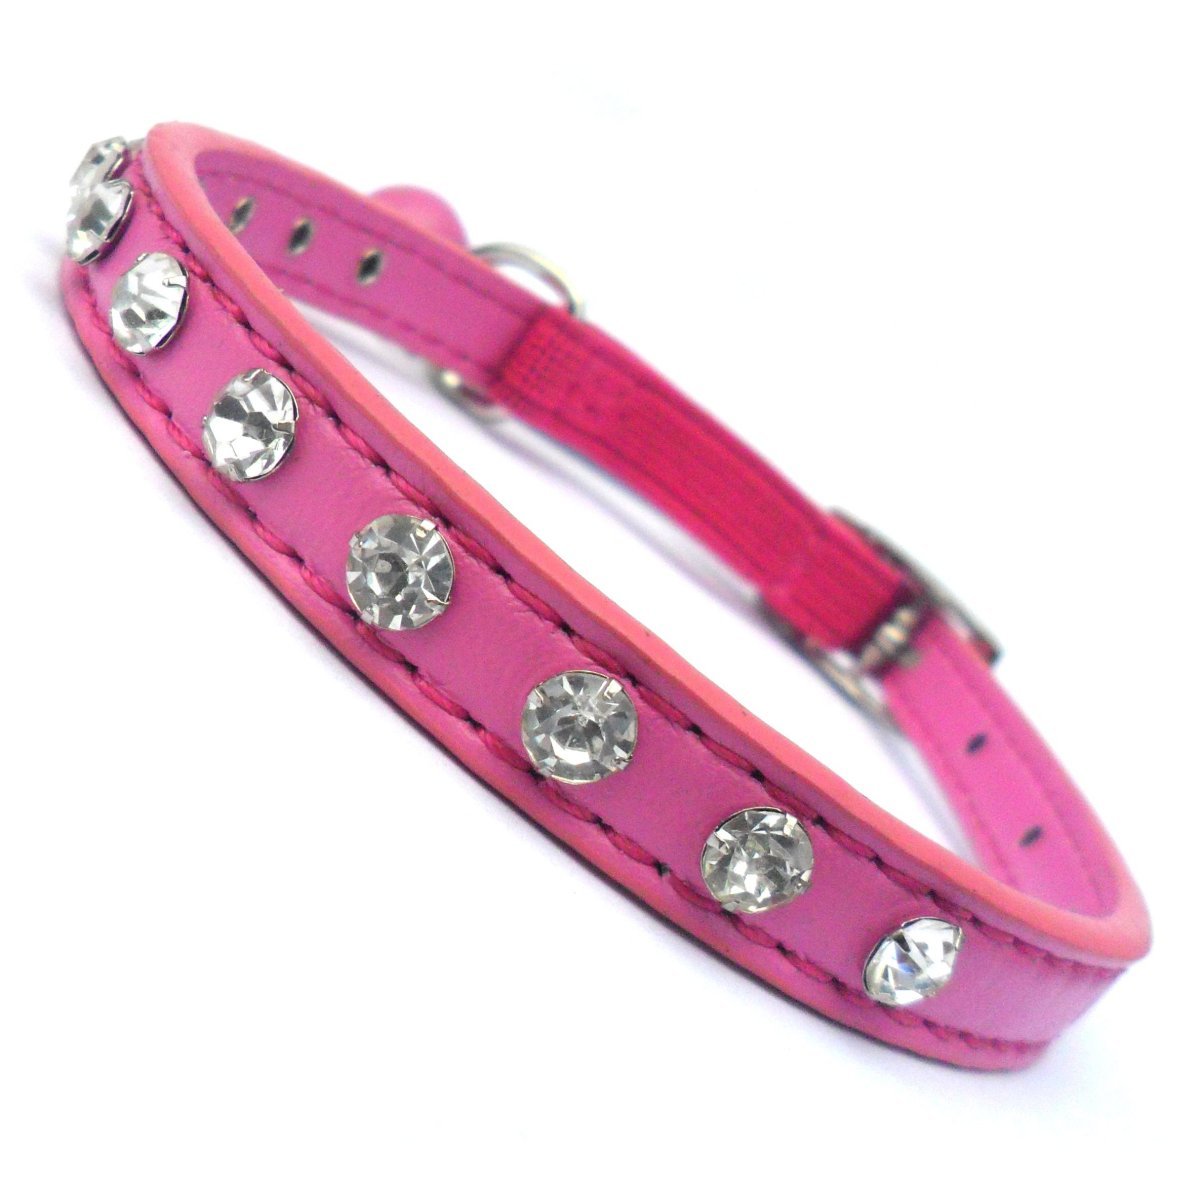 NEW Glamour Puss Cat Collar Cat Collars | Clothes for Cats